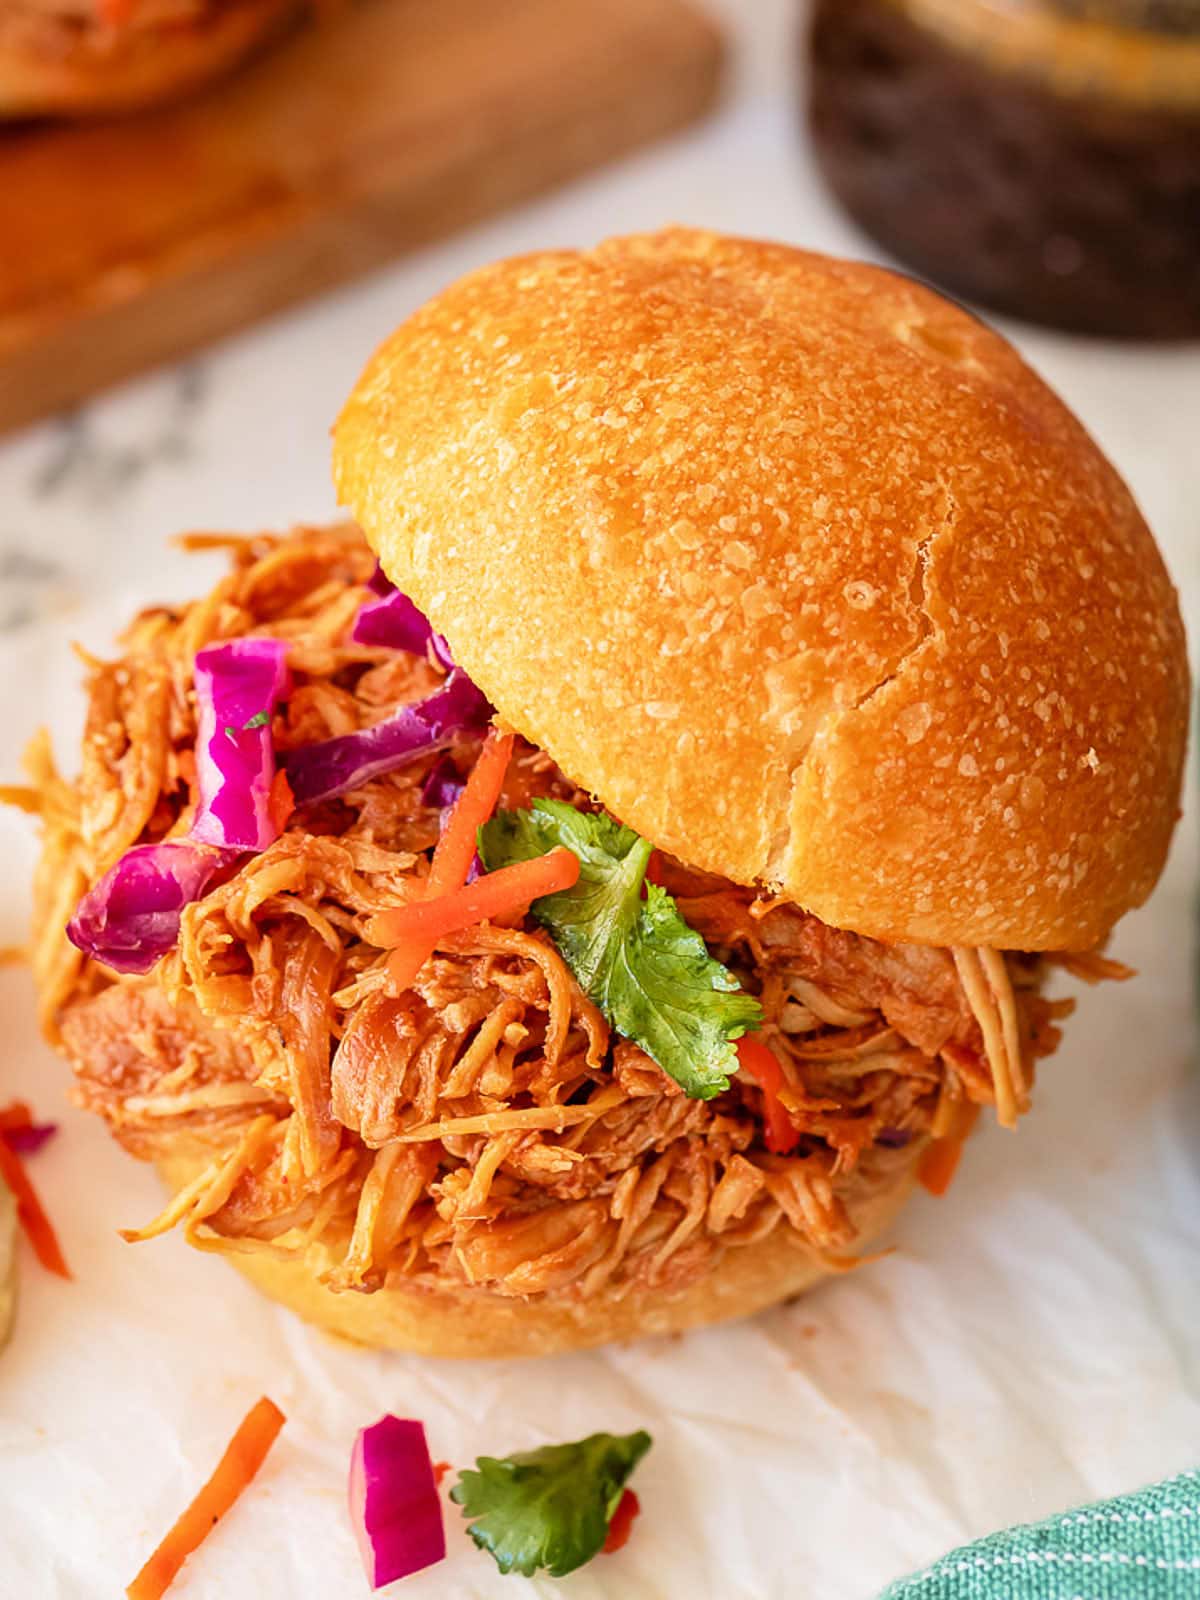 A slow cooker pulled chicken sandwich with a side of slaw.